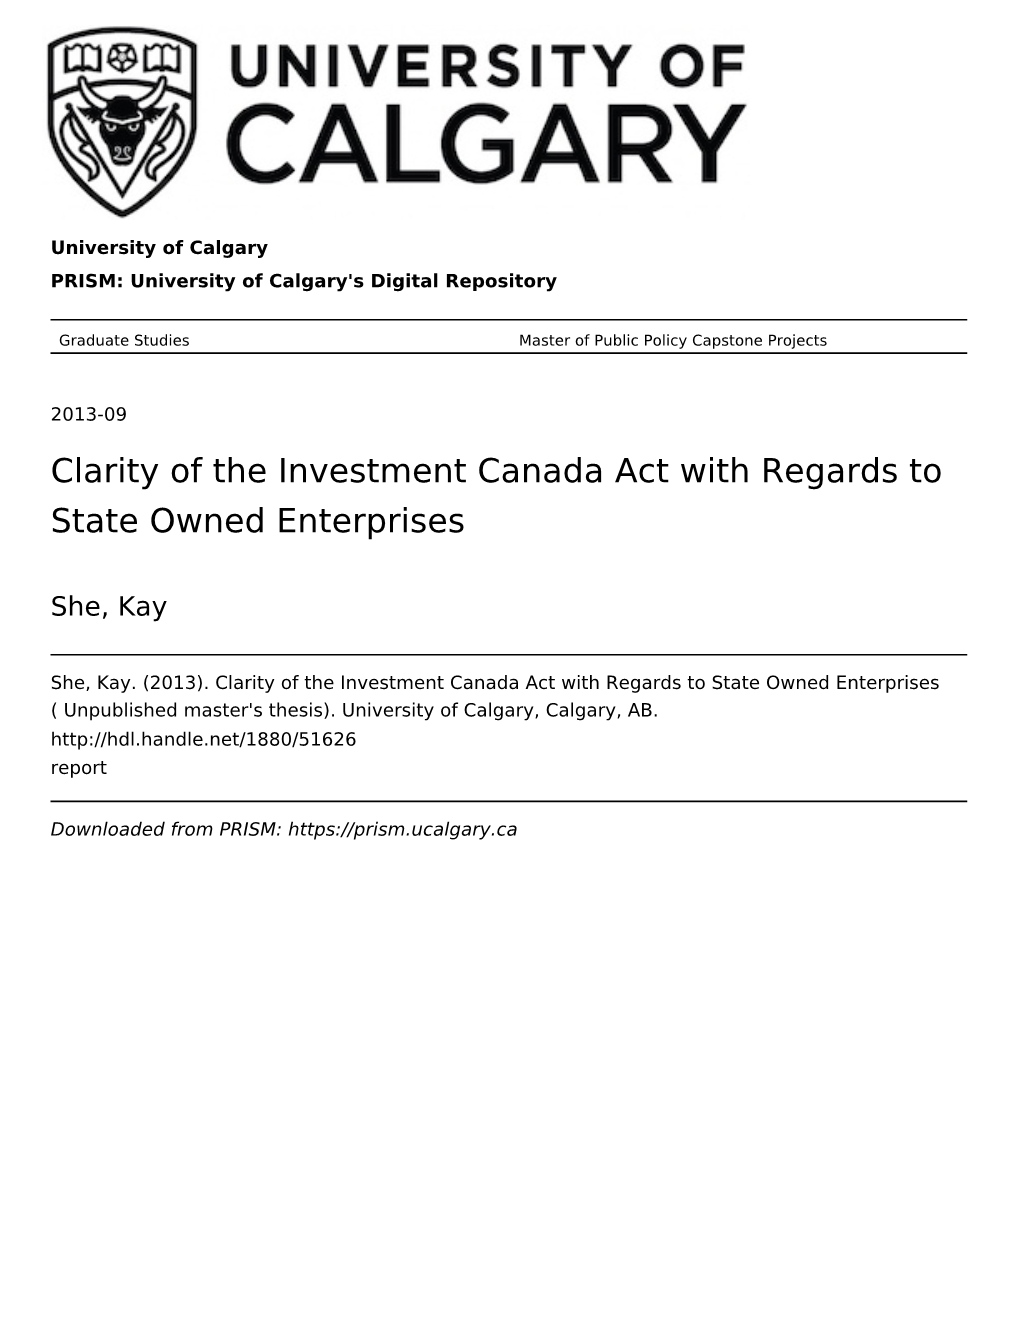 Clarity of the Investment Canada Act with Regards to State Owned Enterprises